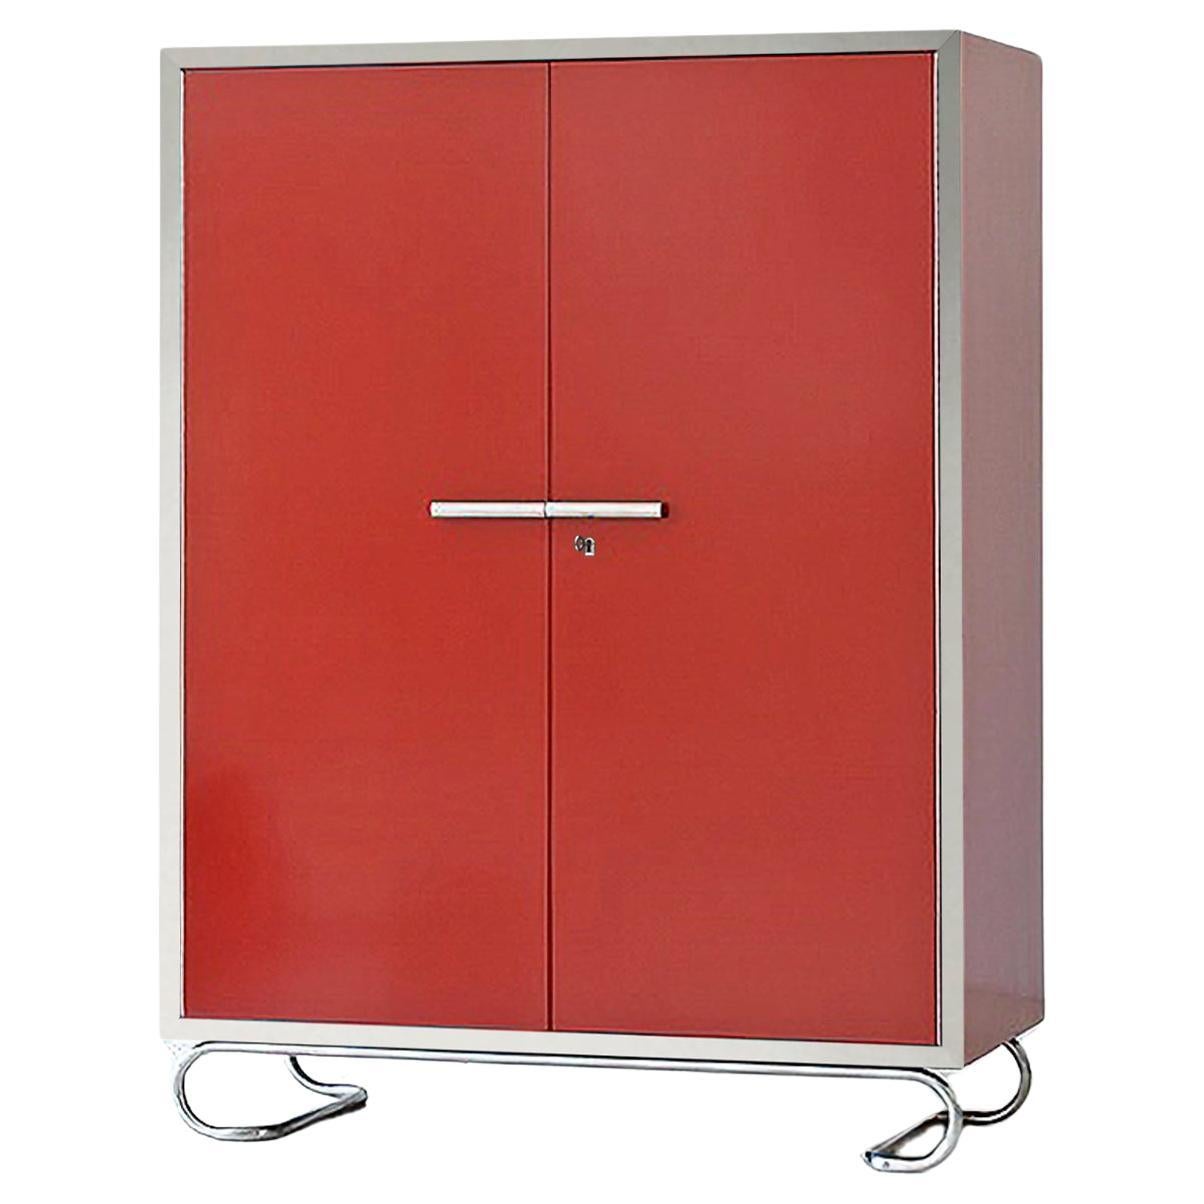 Modernist Storage Cabinet in Lacquered Wood and Tubular Steel Hardware, Bespoke